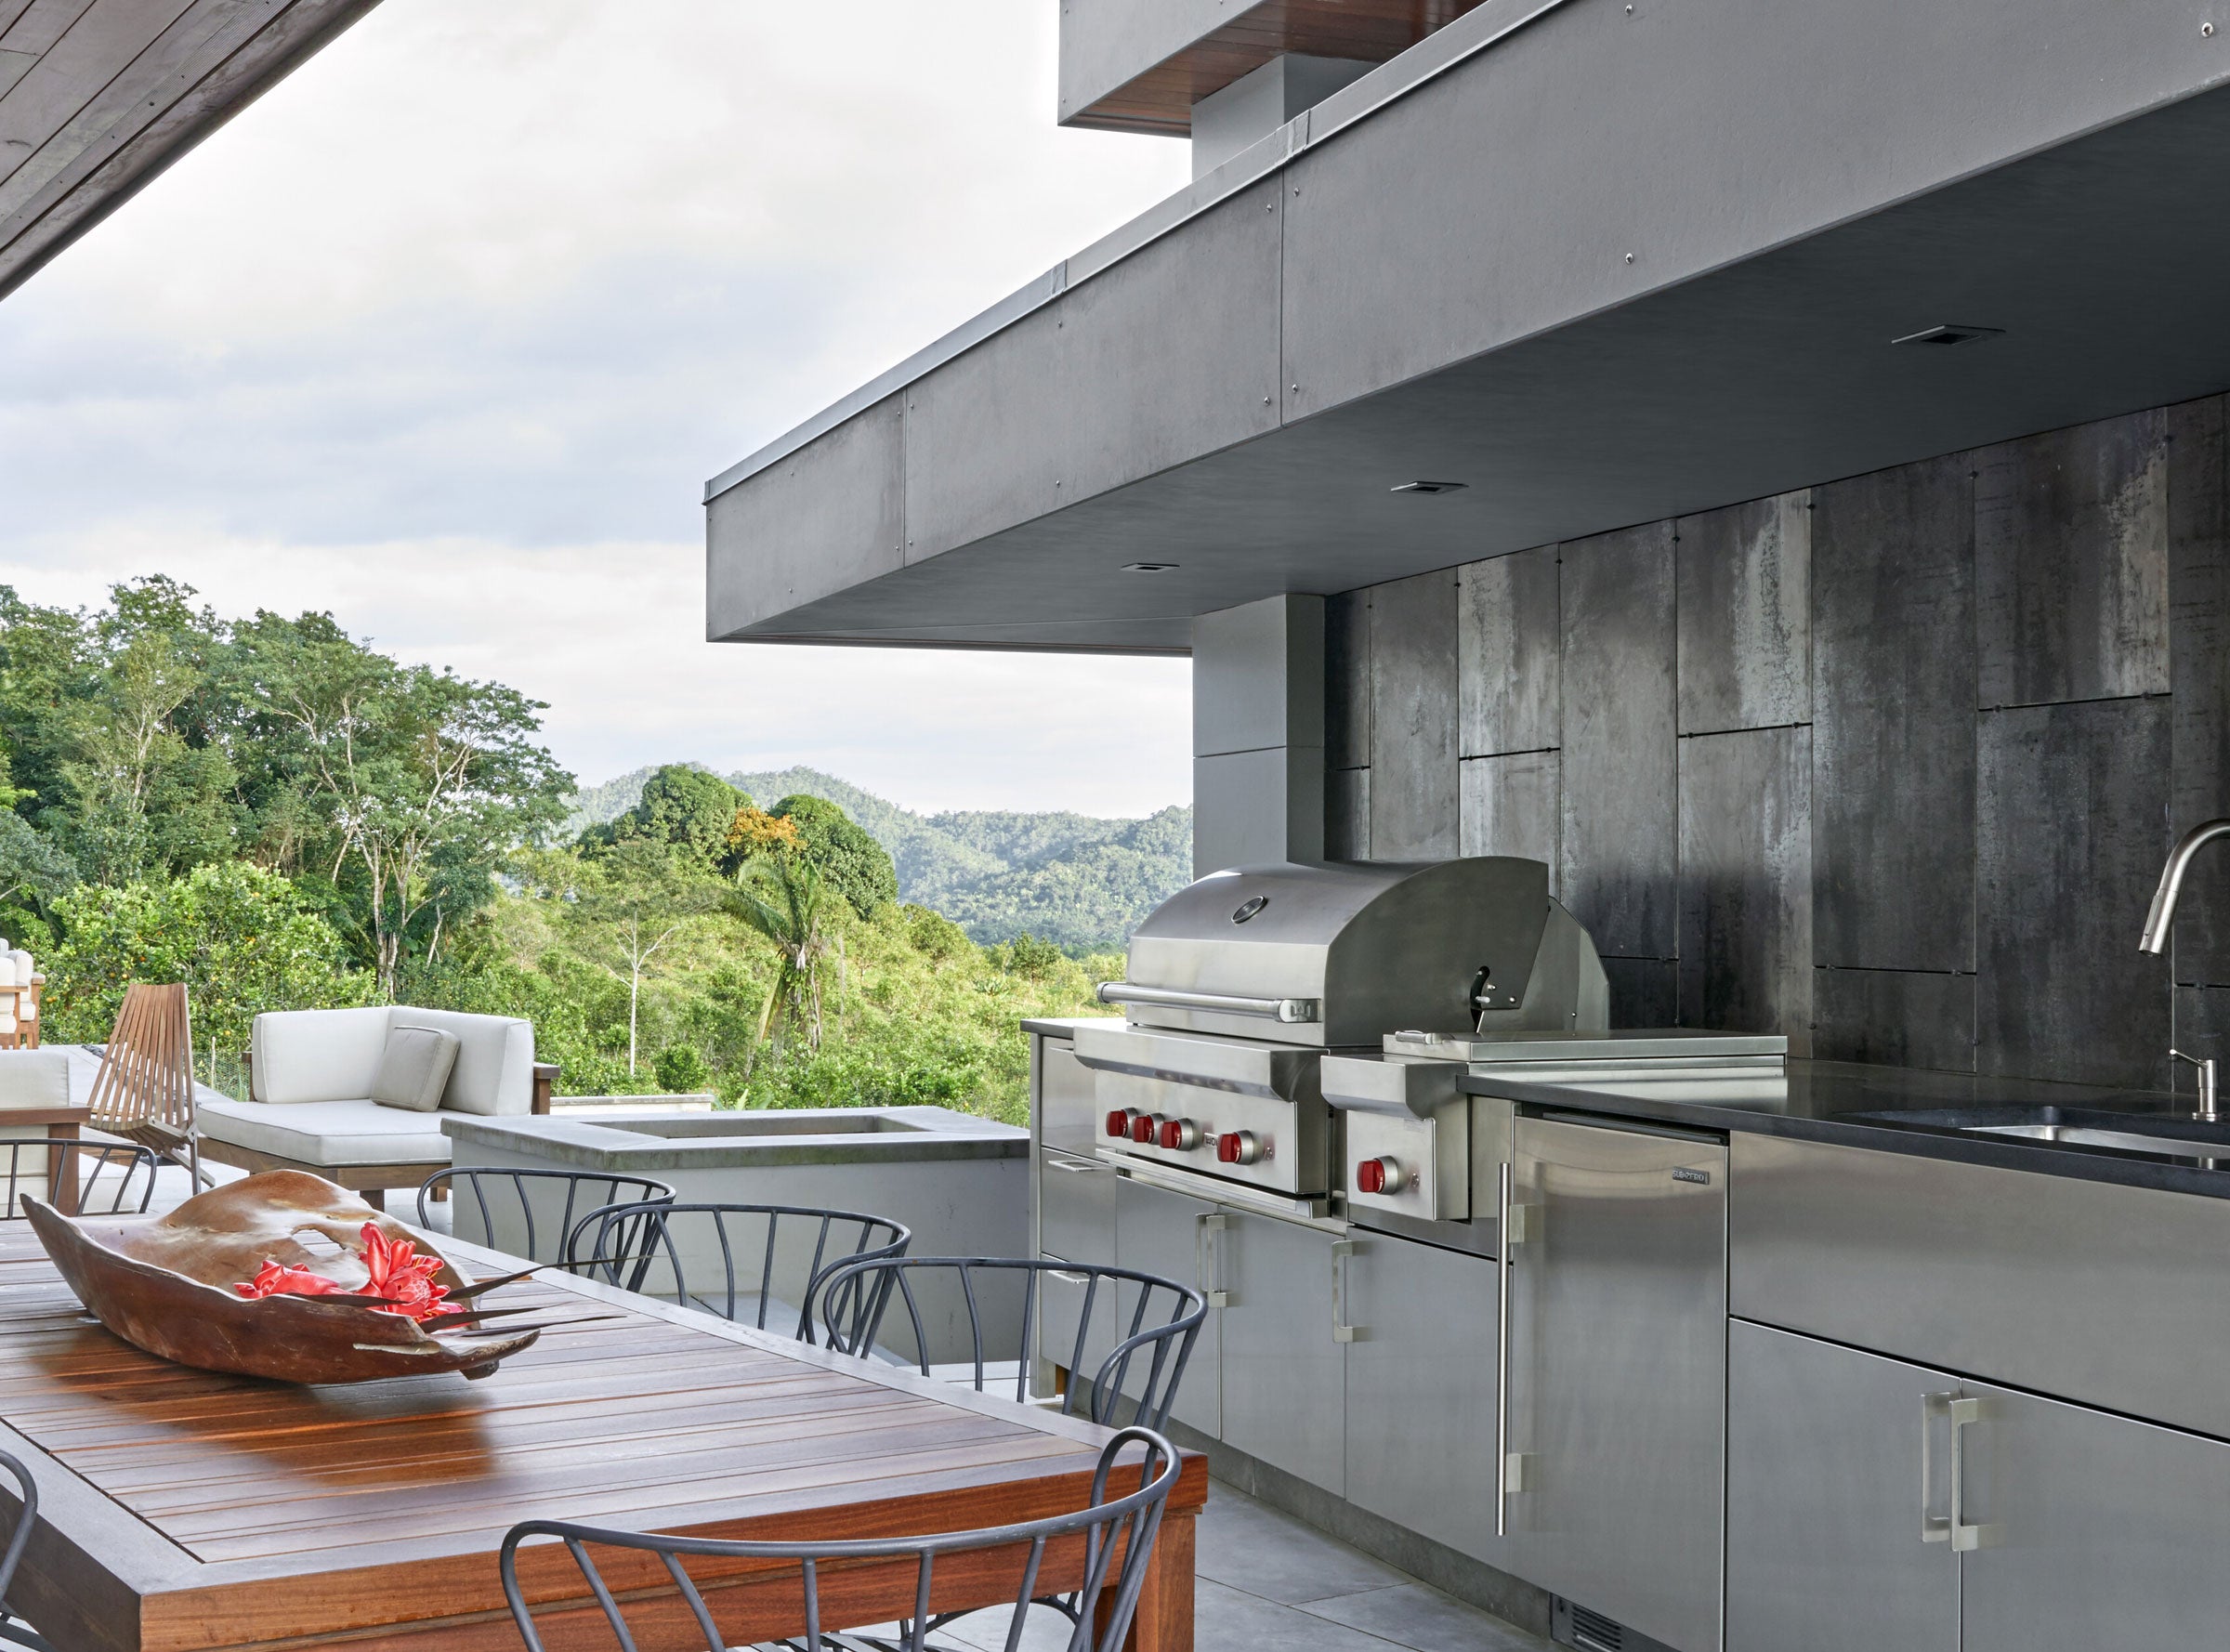 SubZero and Wolf Outdoor Kitchens at Expressions Home Gallery